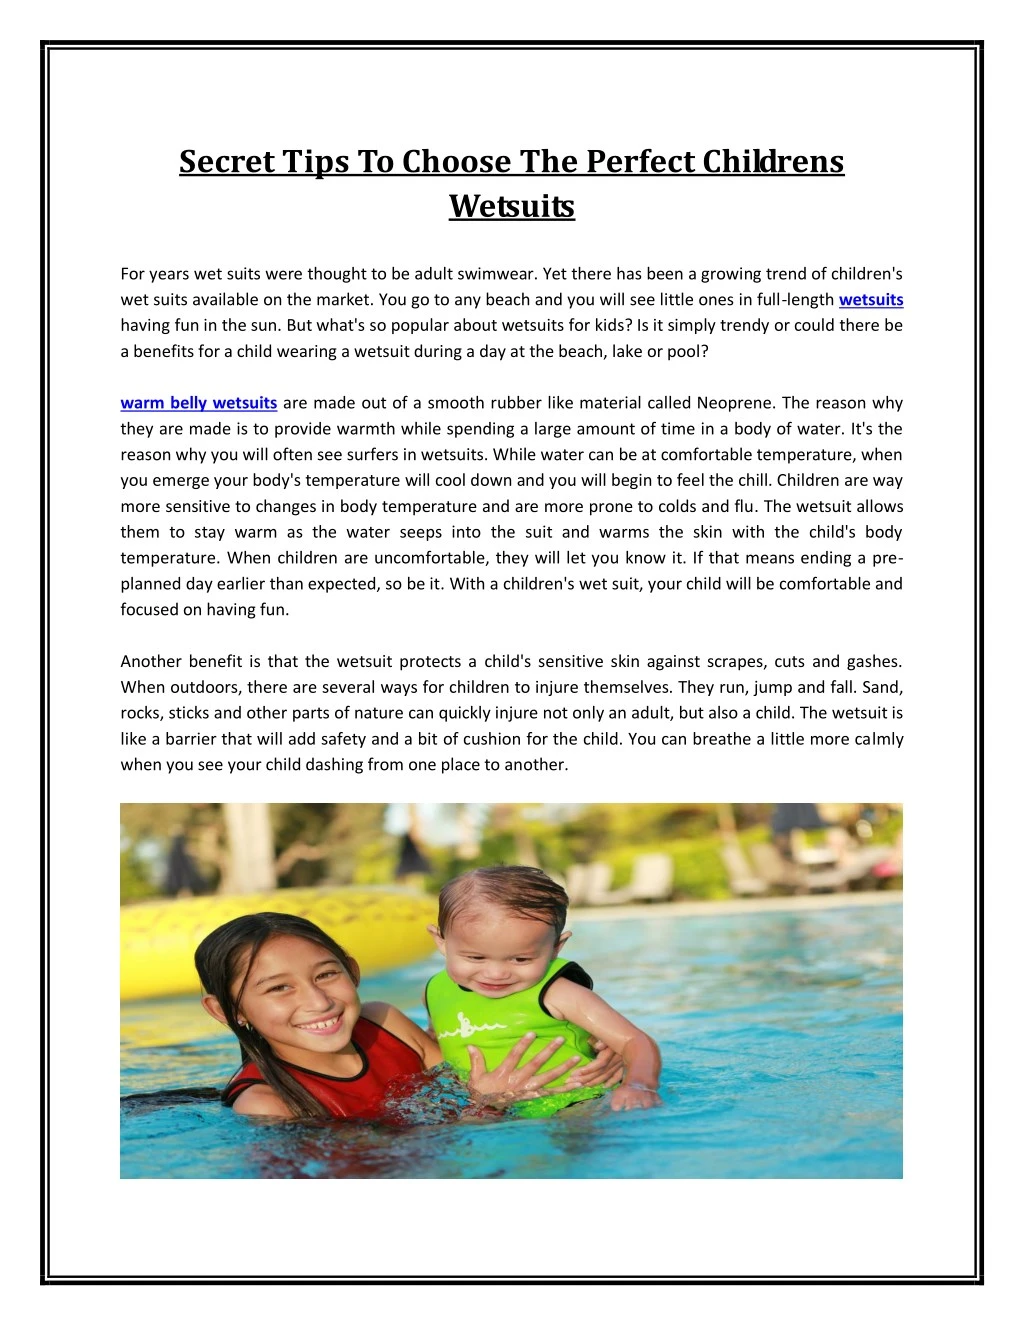 secret tips to choose the perfect childrens